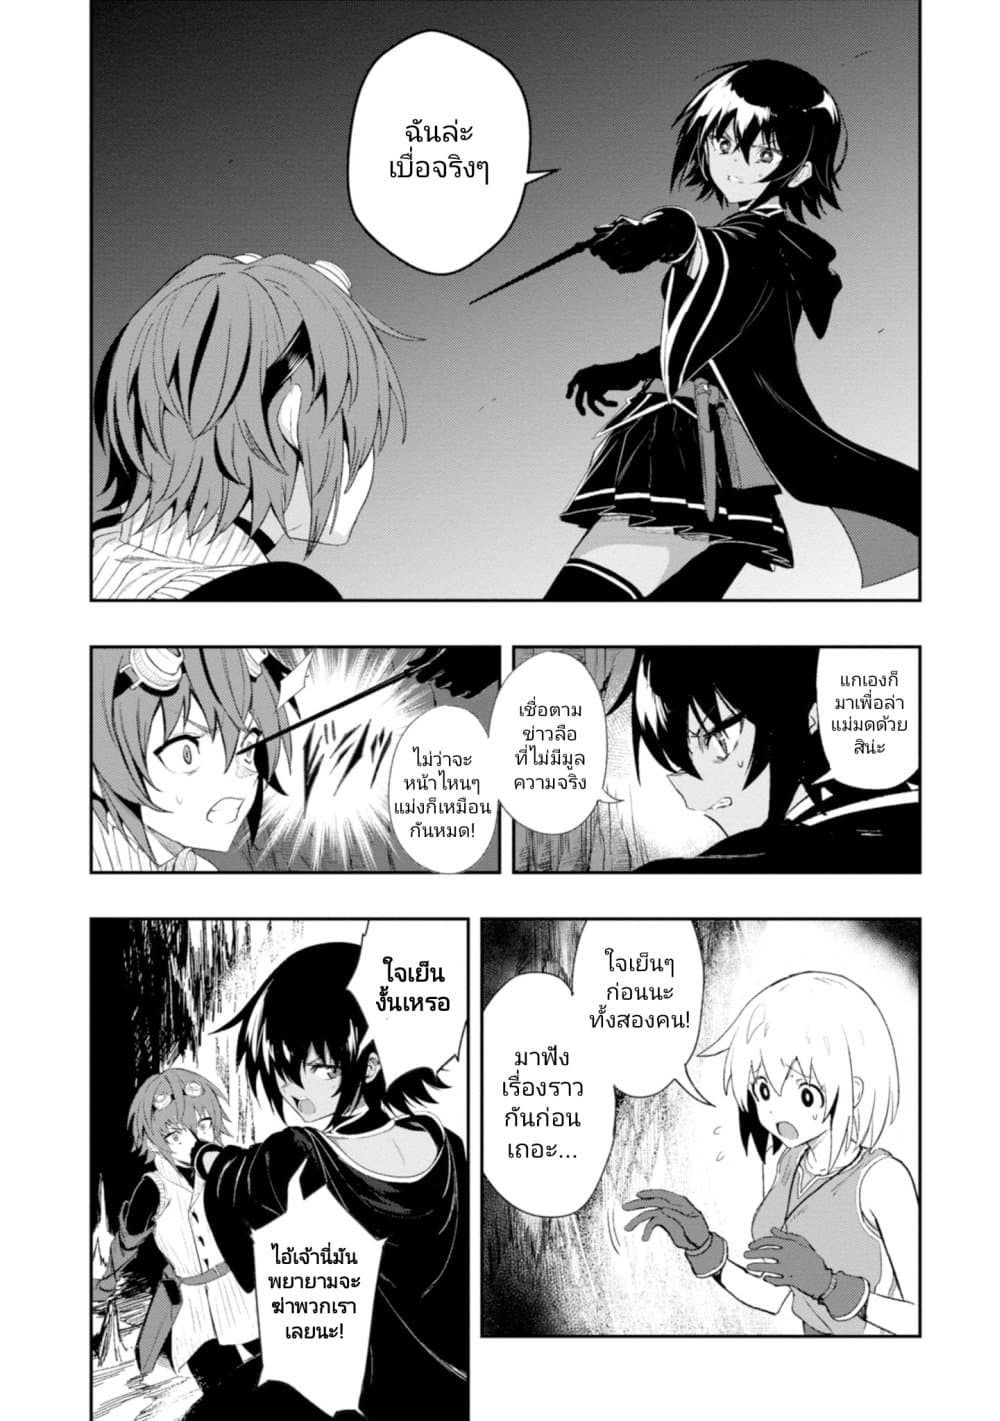 Witch Guild Fantasia 4 (2)